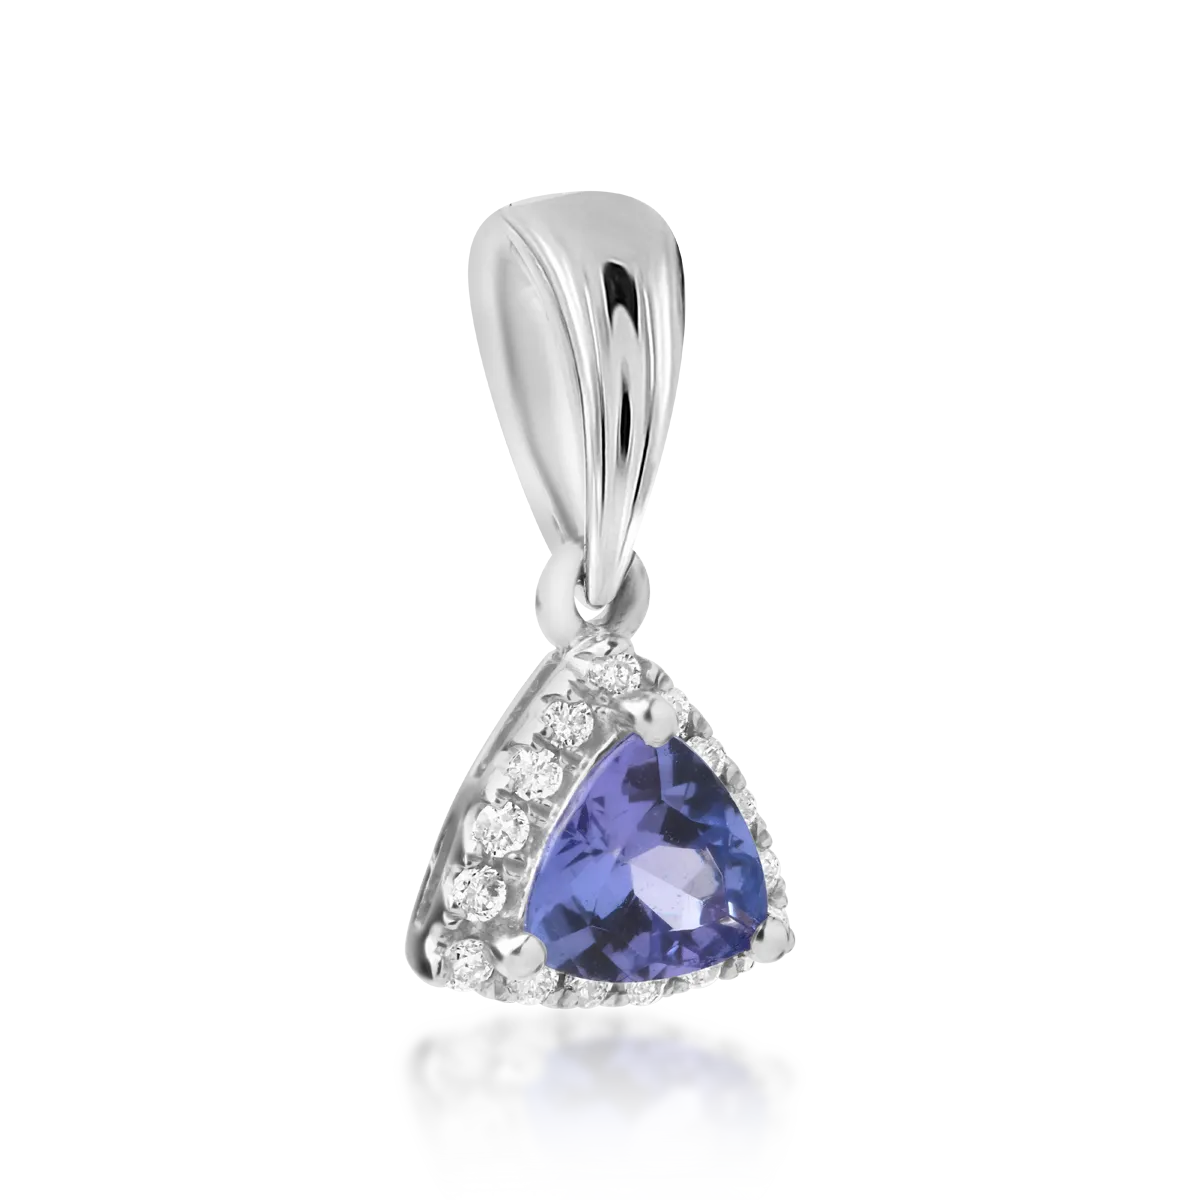 14K white gold pendant with tanzanite of 0.44ct and diamonds of 0.08ct